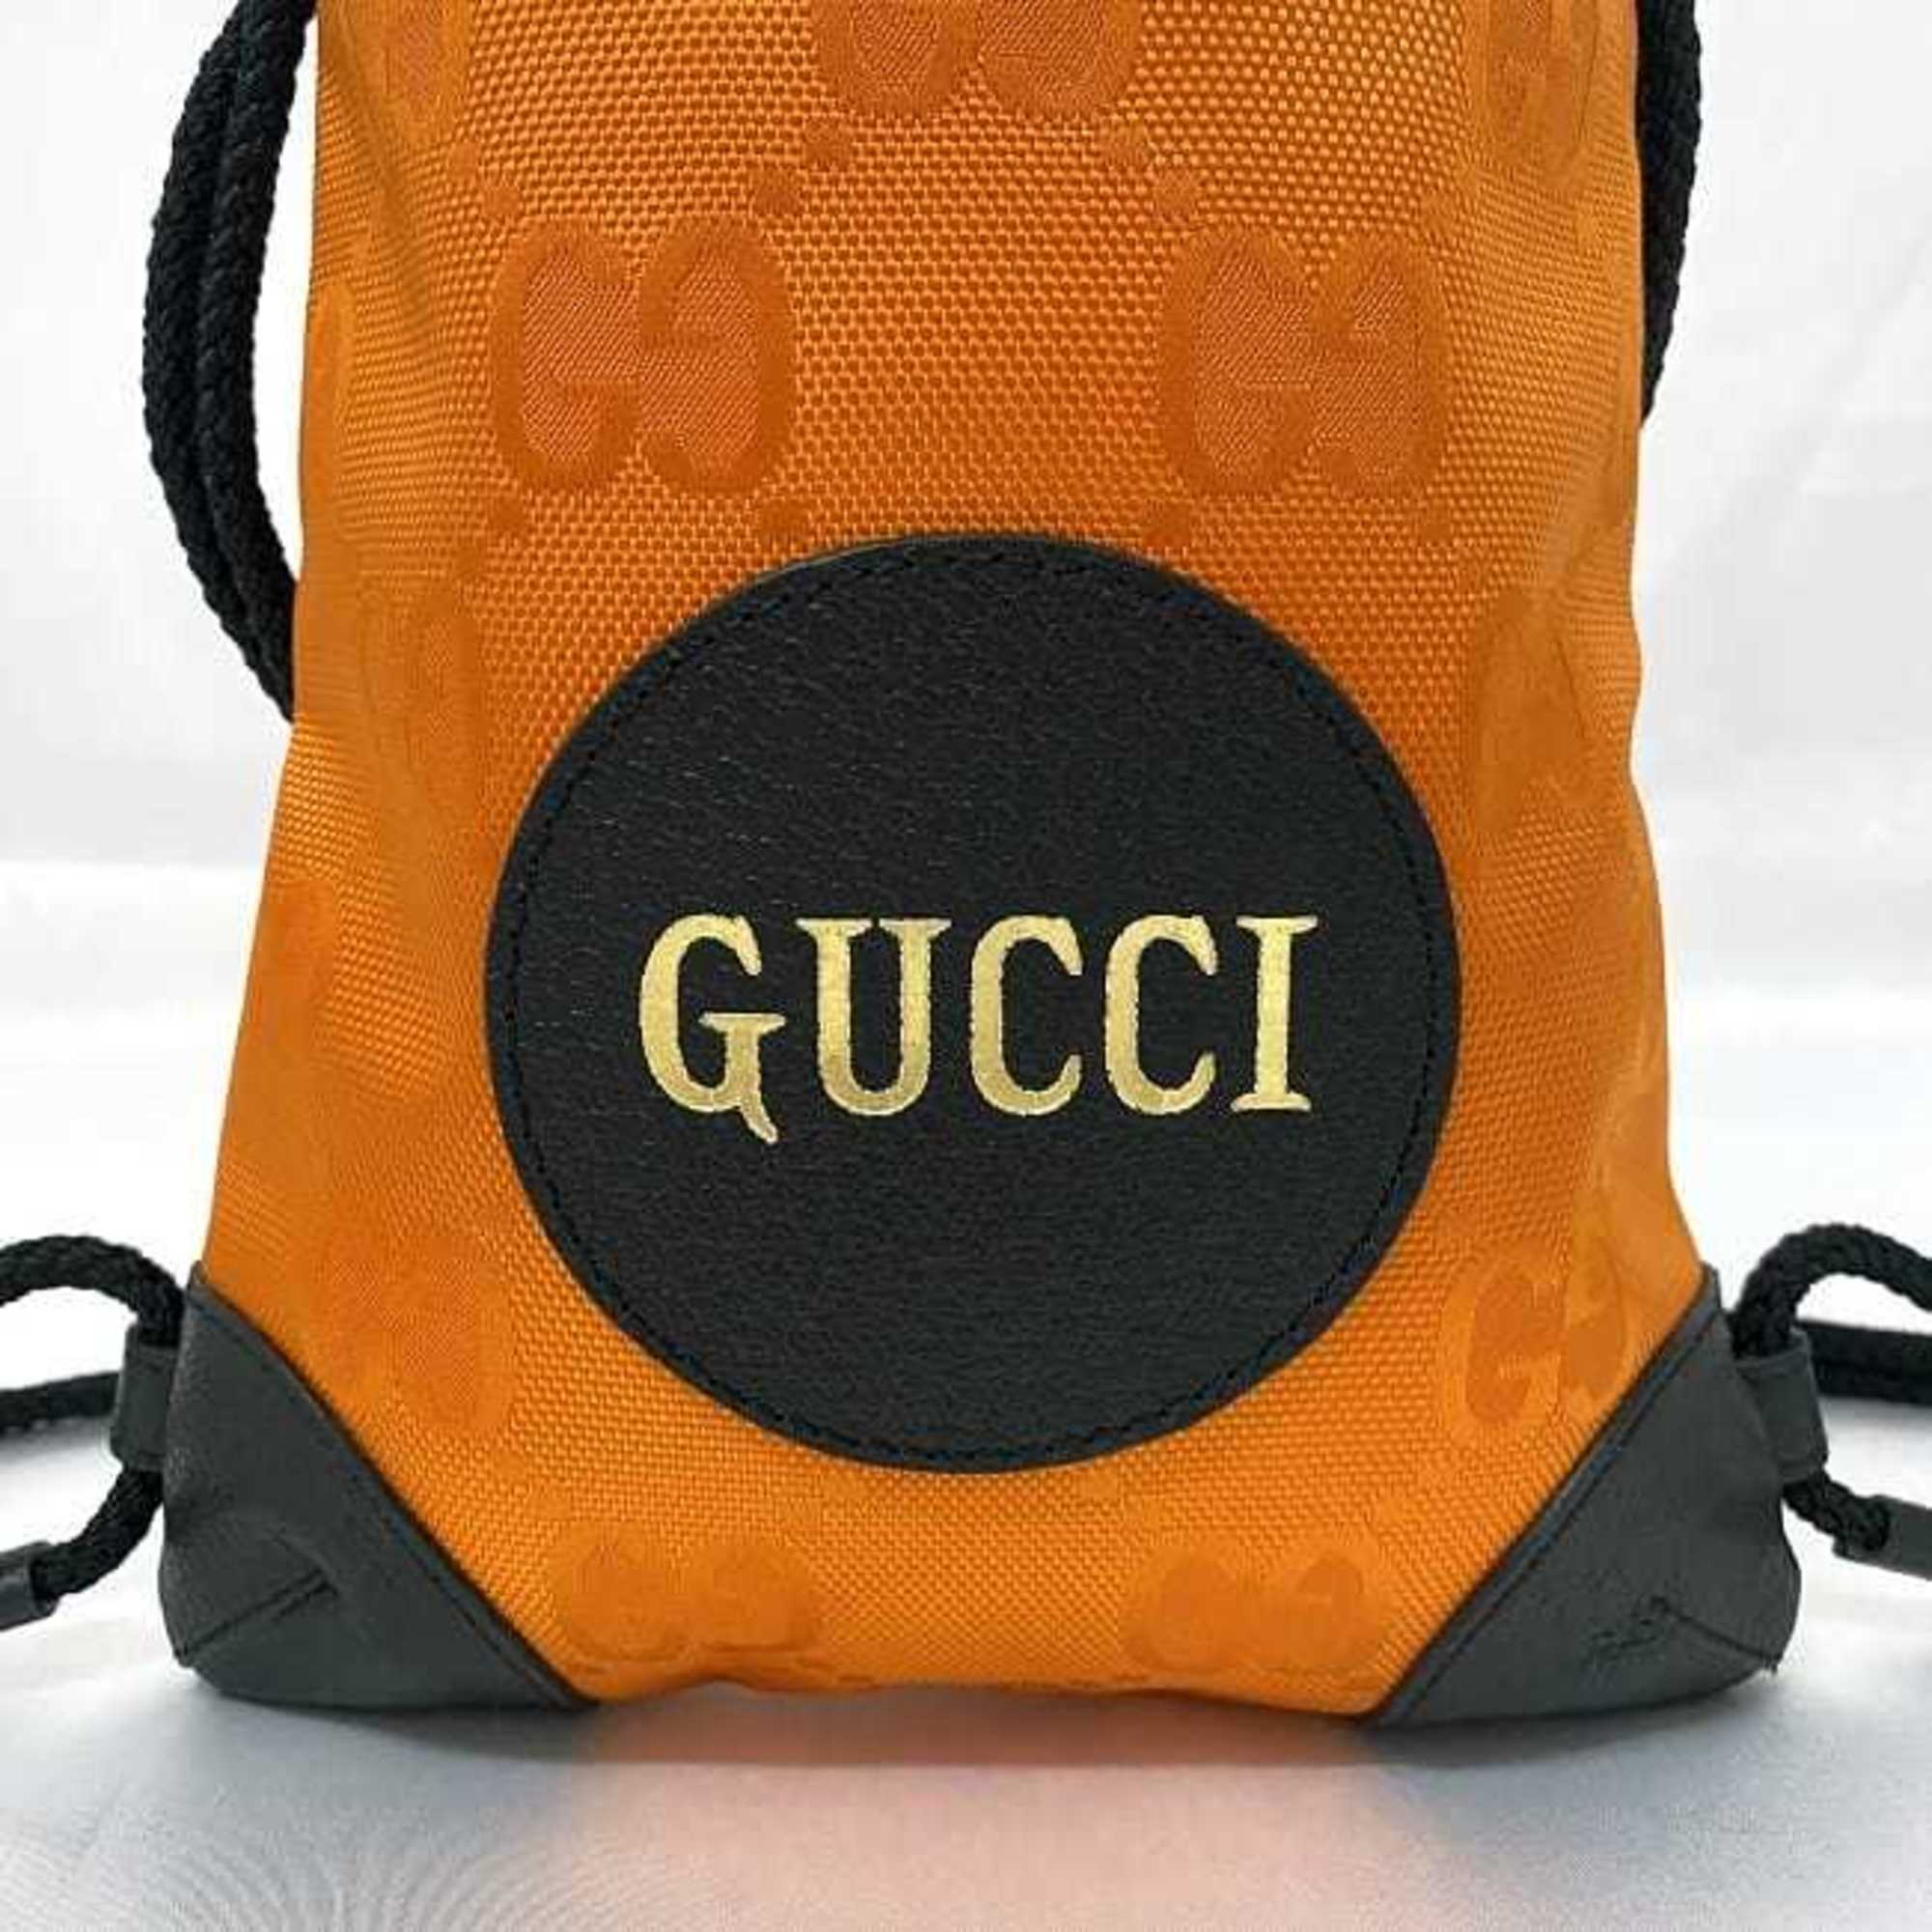 Gucci Backpack Orange Black Off The Grit 643887 Canvas Leather GUCCI GG Nylon Compact